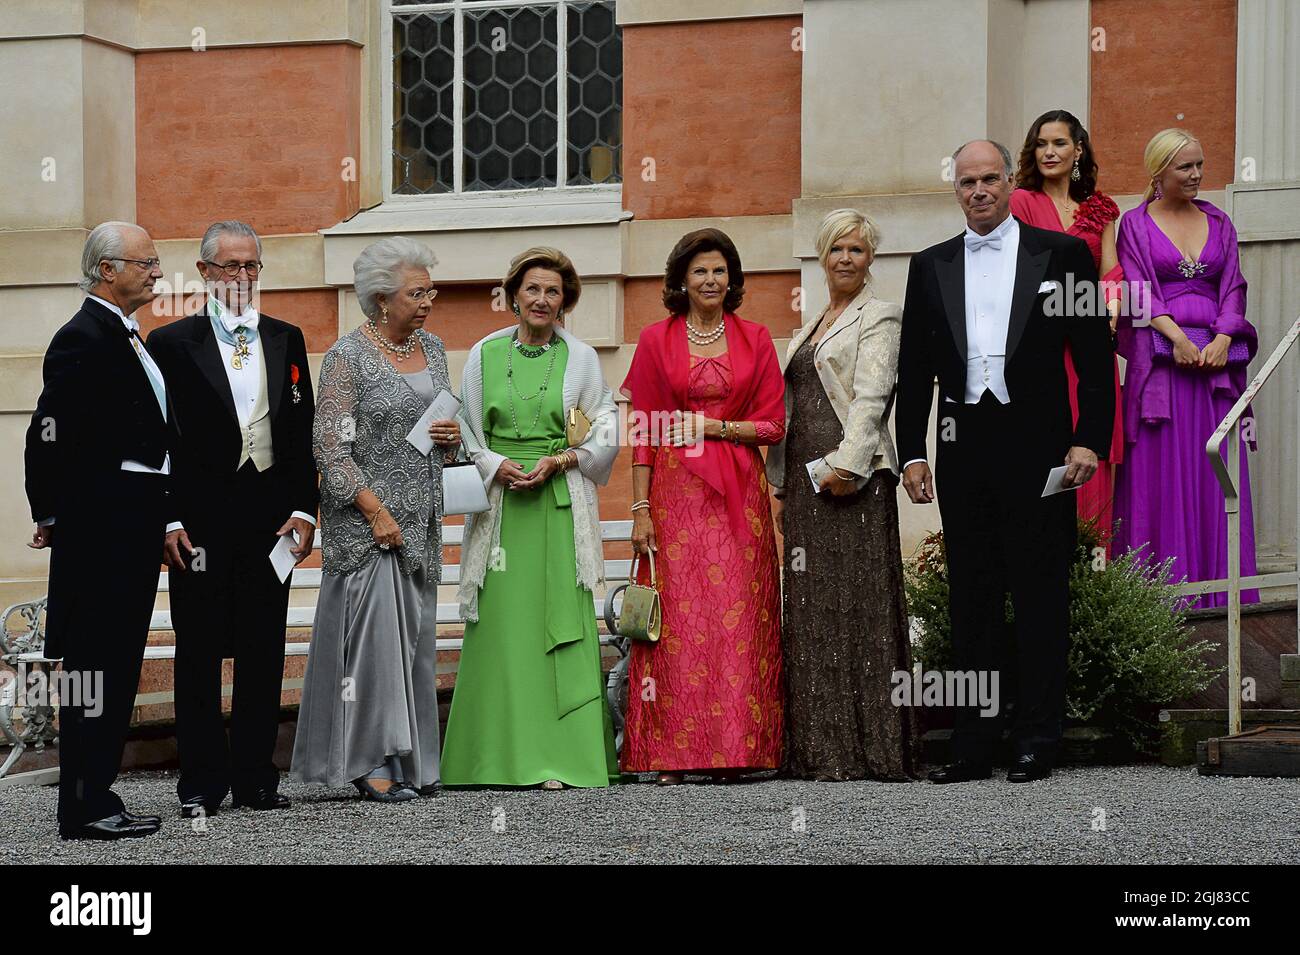 STOCKHOLM 2013-08-31 King Carl Gustaf, Tord Magnuson, Princess Christina, Queen Sonja, Queen Silvia and father of bride AndrÃ©n arrive for the wedding at the Ulriksdal Palace Chapel in Stockholm, Sweden, August 31, 2013. The Swedish Kings godson Gustaf Magnuson (son of Princess Christina and Tord Magnuson) married model Vicky AndrÃ©n Saturday. Photo Jonas Ekstromer / SCANPIX / ** SWEDEN OUT ** Stock Photo